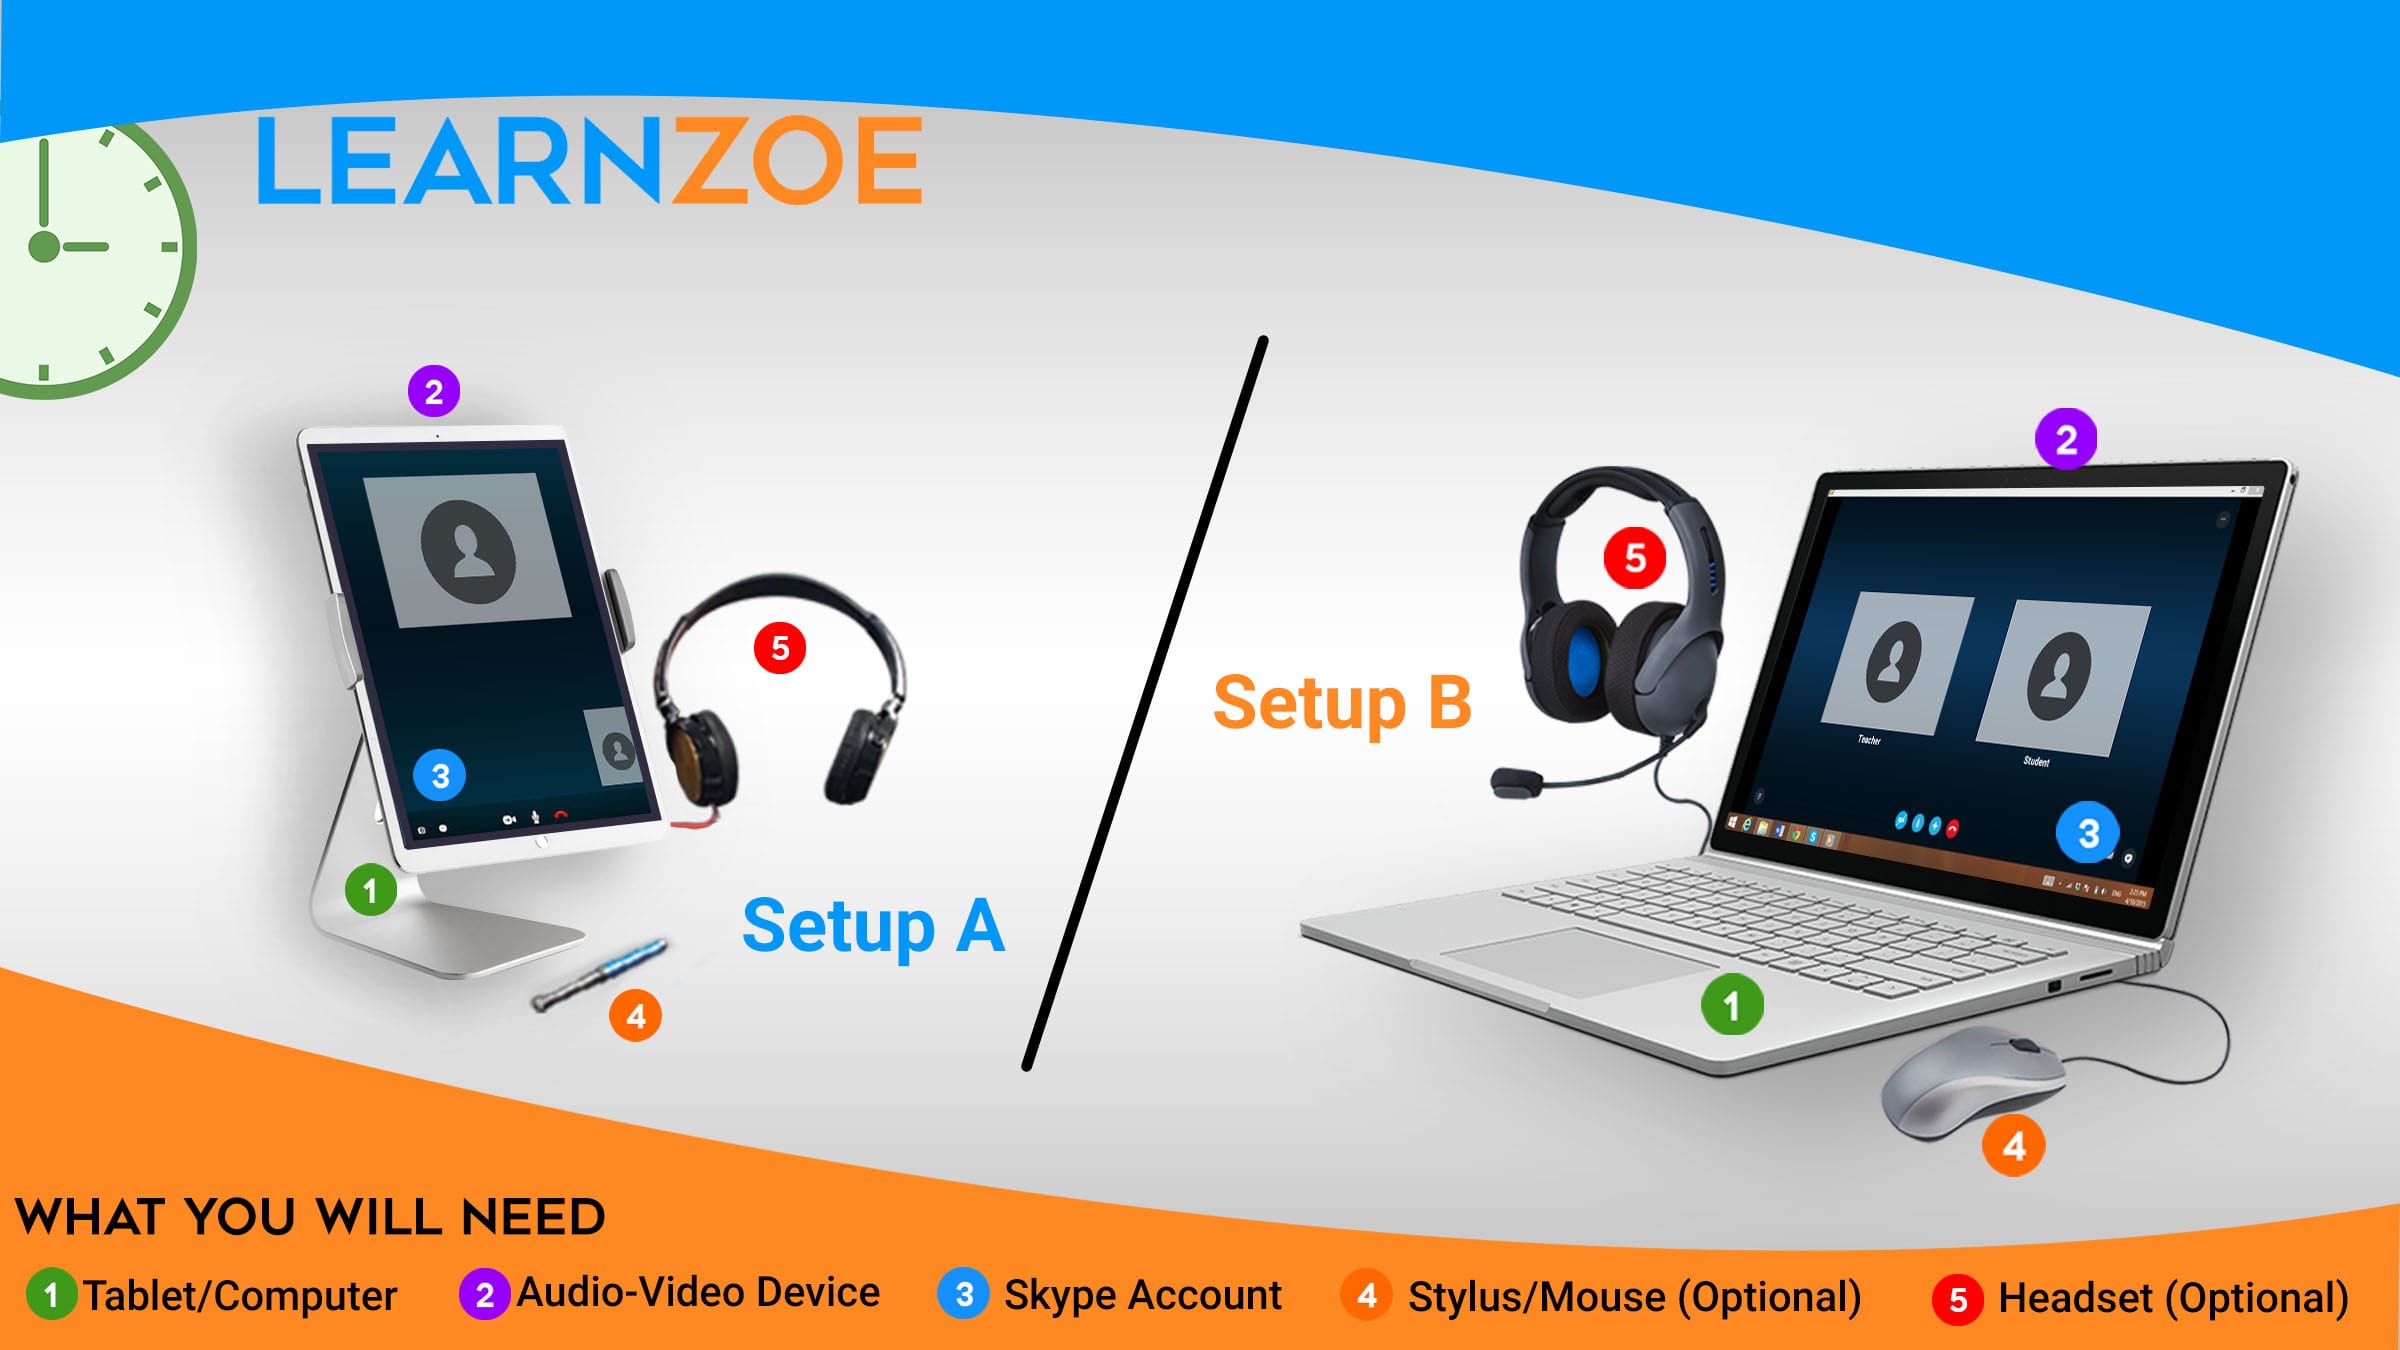 A tablet, headset, stylus and skype account are needed for Audio Learn Zoe session